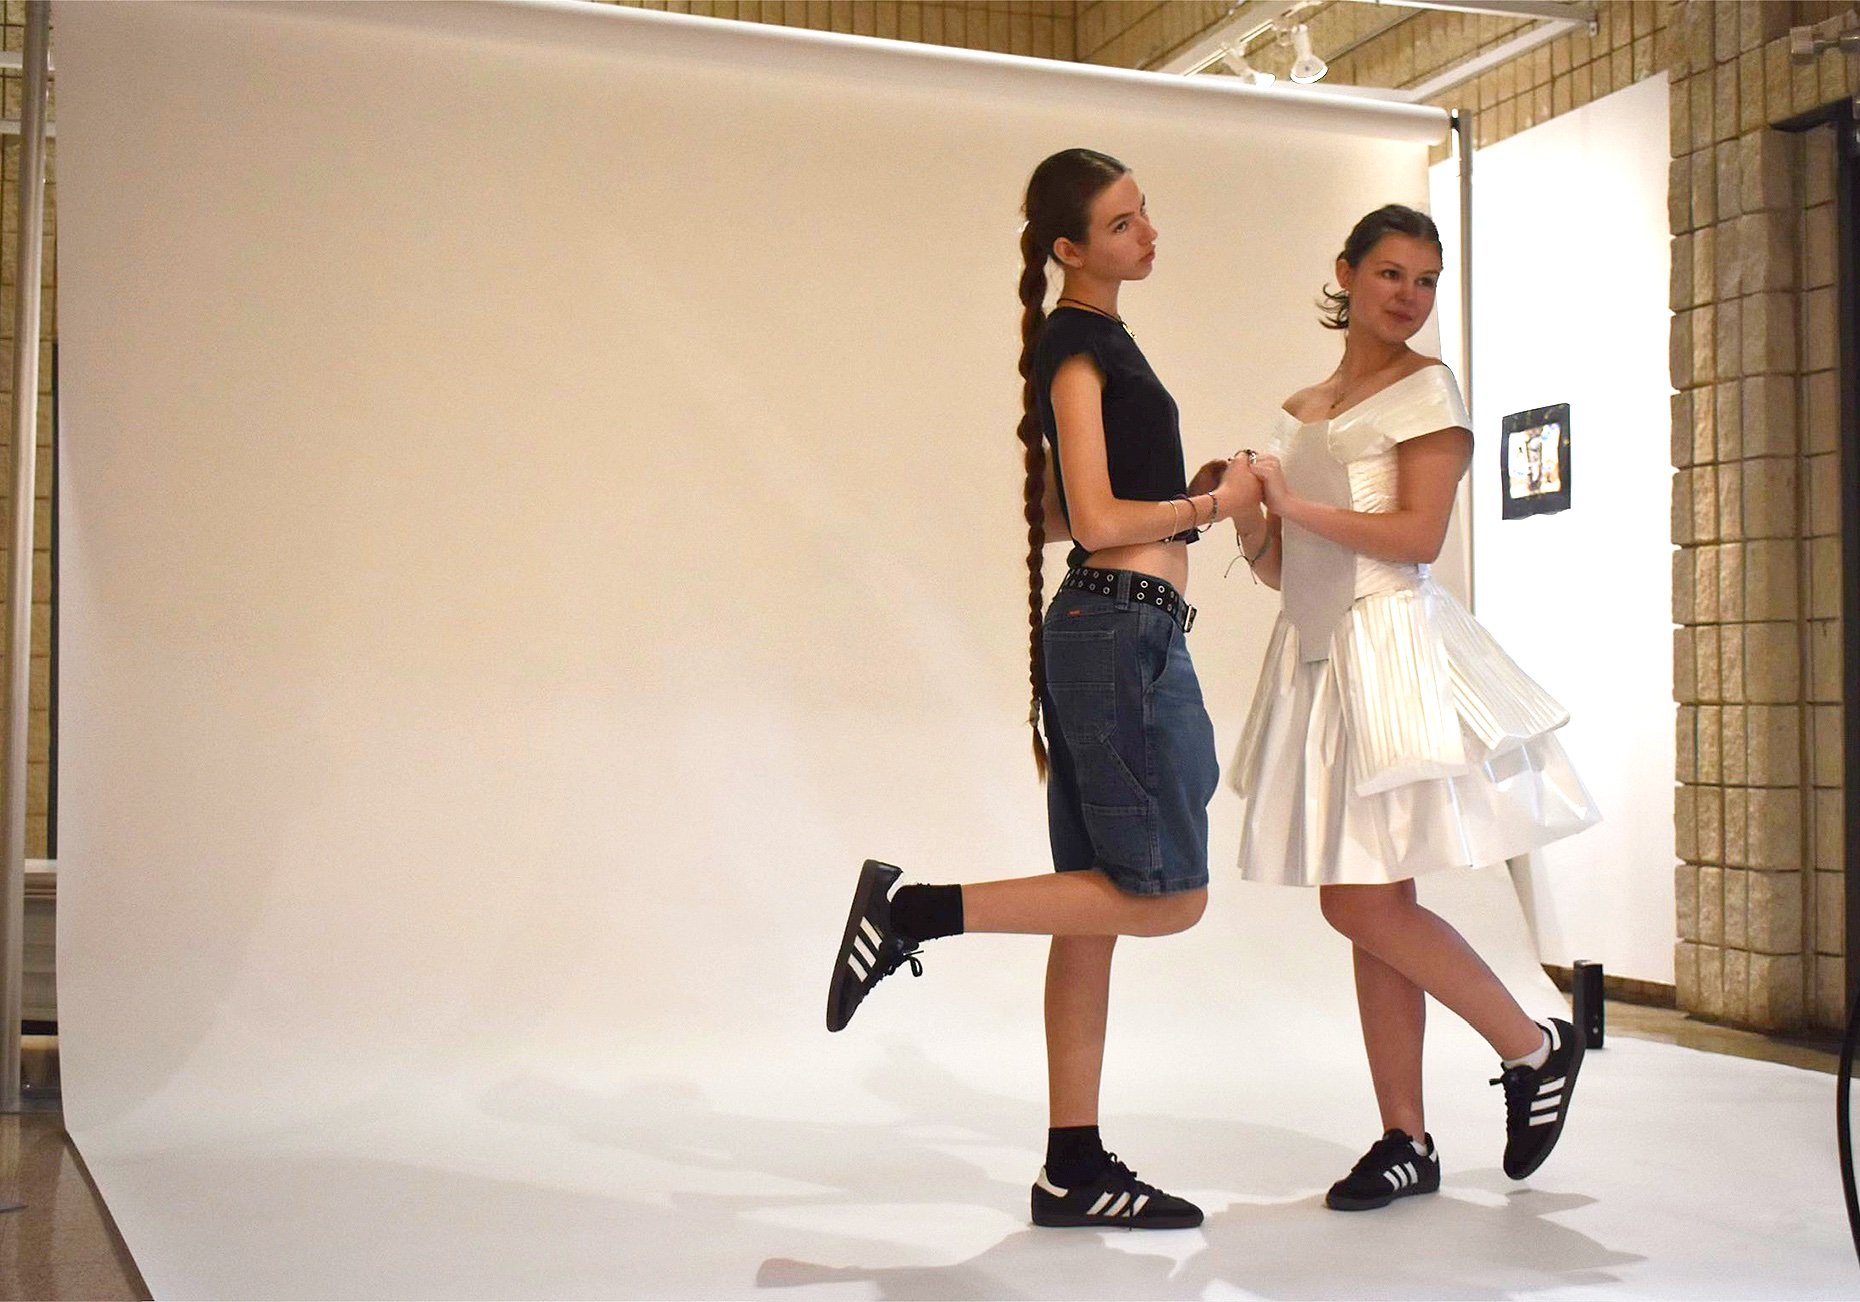 DAINTY DESIGN: When junior and designer Anastasia Varenberg (left) approached junior Ella Thornbury (right) for modeling, Thornbury knew she had to accept. 

“Shes my best friend in the whole world, so obviously, I had to say yes,” Thornbury said. 

In return, Varenberg created an intricate dress fitted specifically for Thornbury.

“I was trying to go architectural with a lot of these like leaves,” Varenberg said. “I also made a cool little thing where [the dress] folds over. It looks kind of flowery and dainty and reminds me of Vivian Westwood a little bit.”
